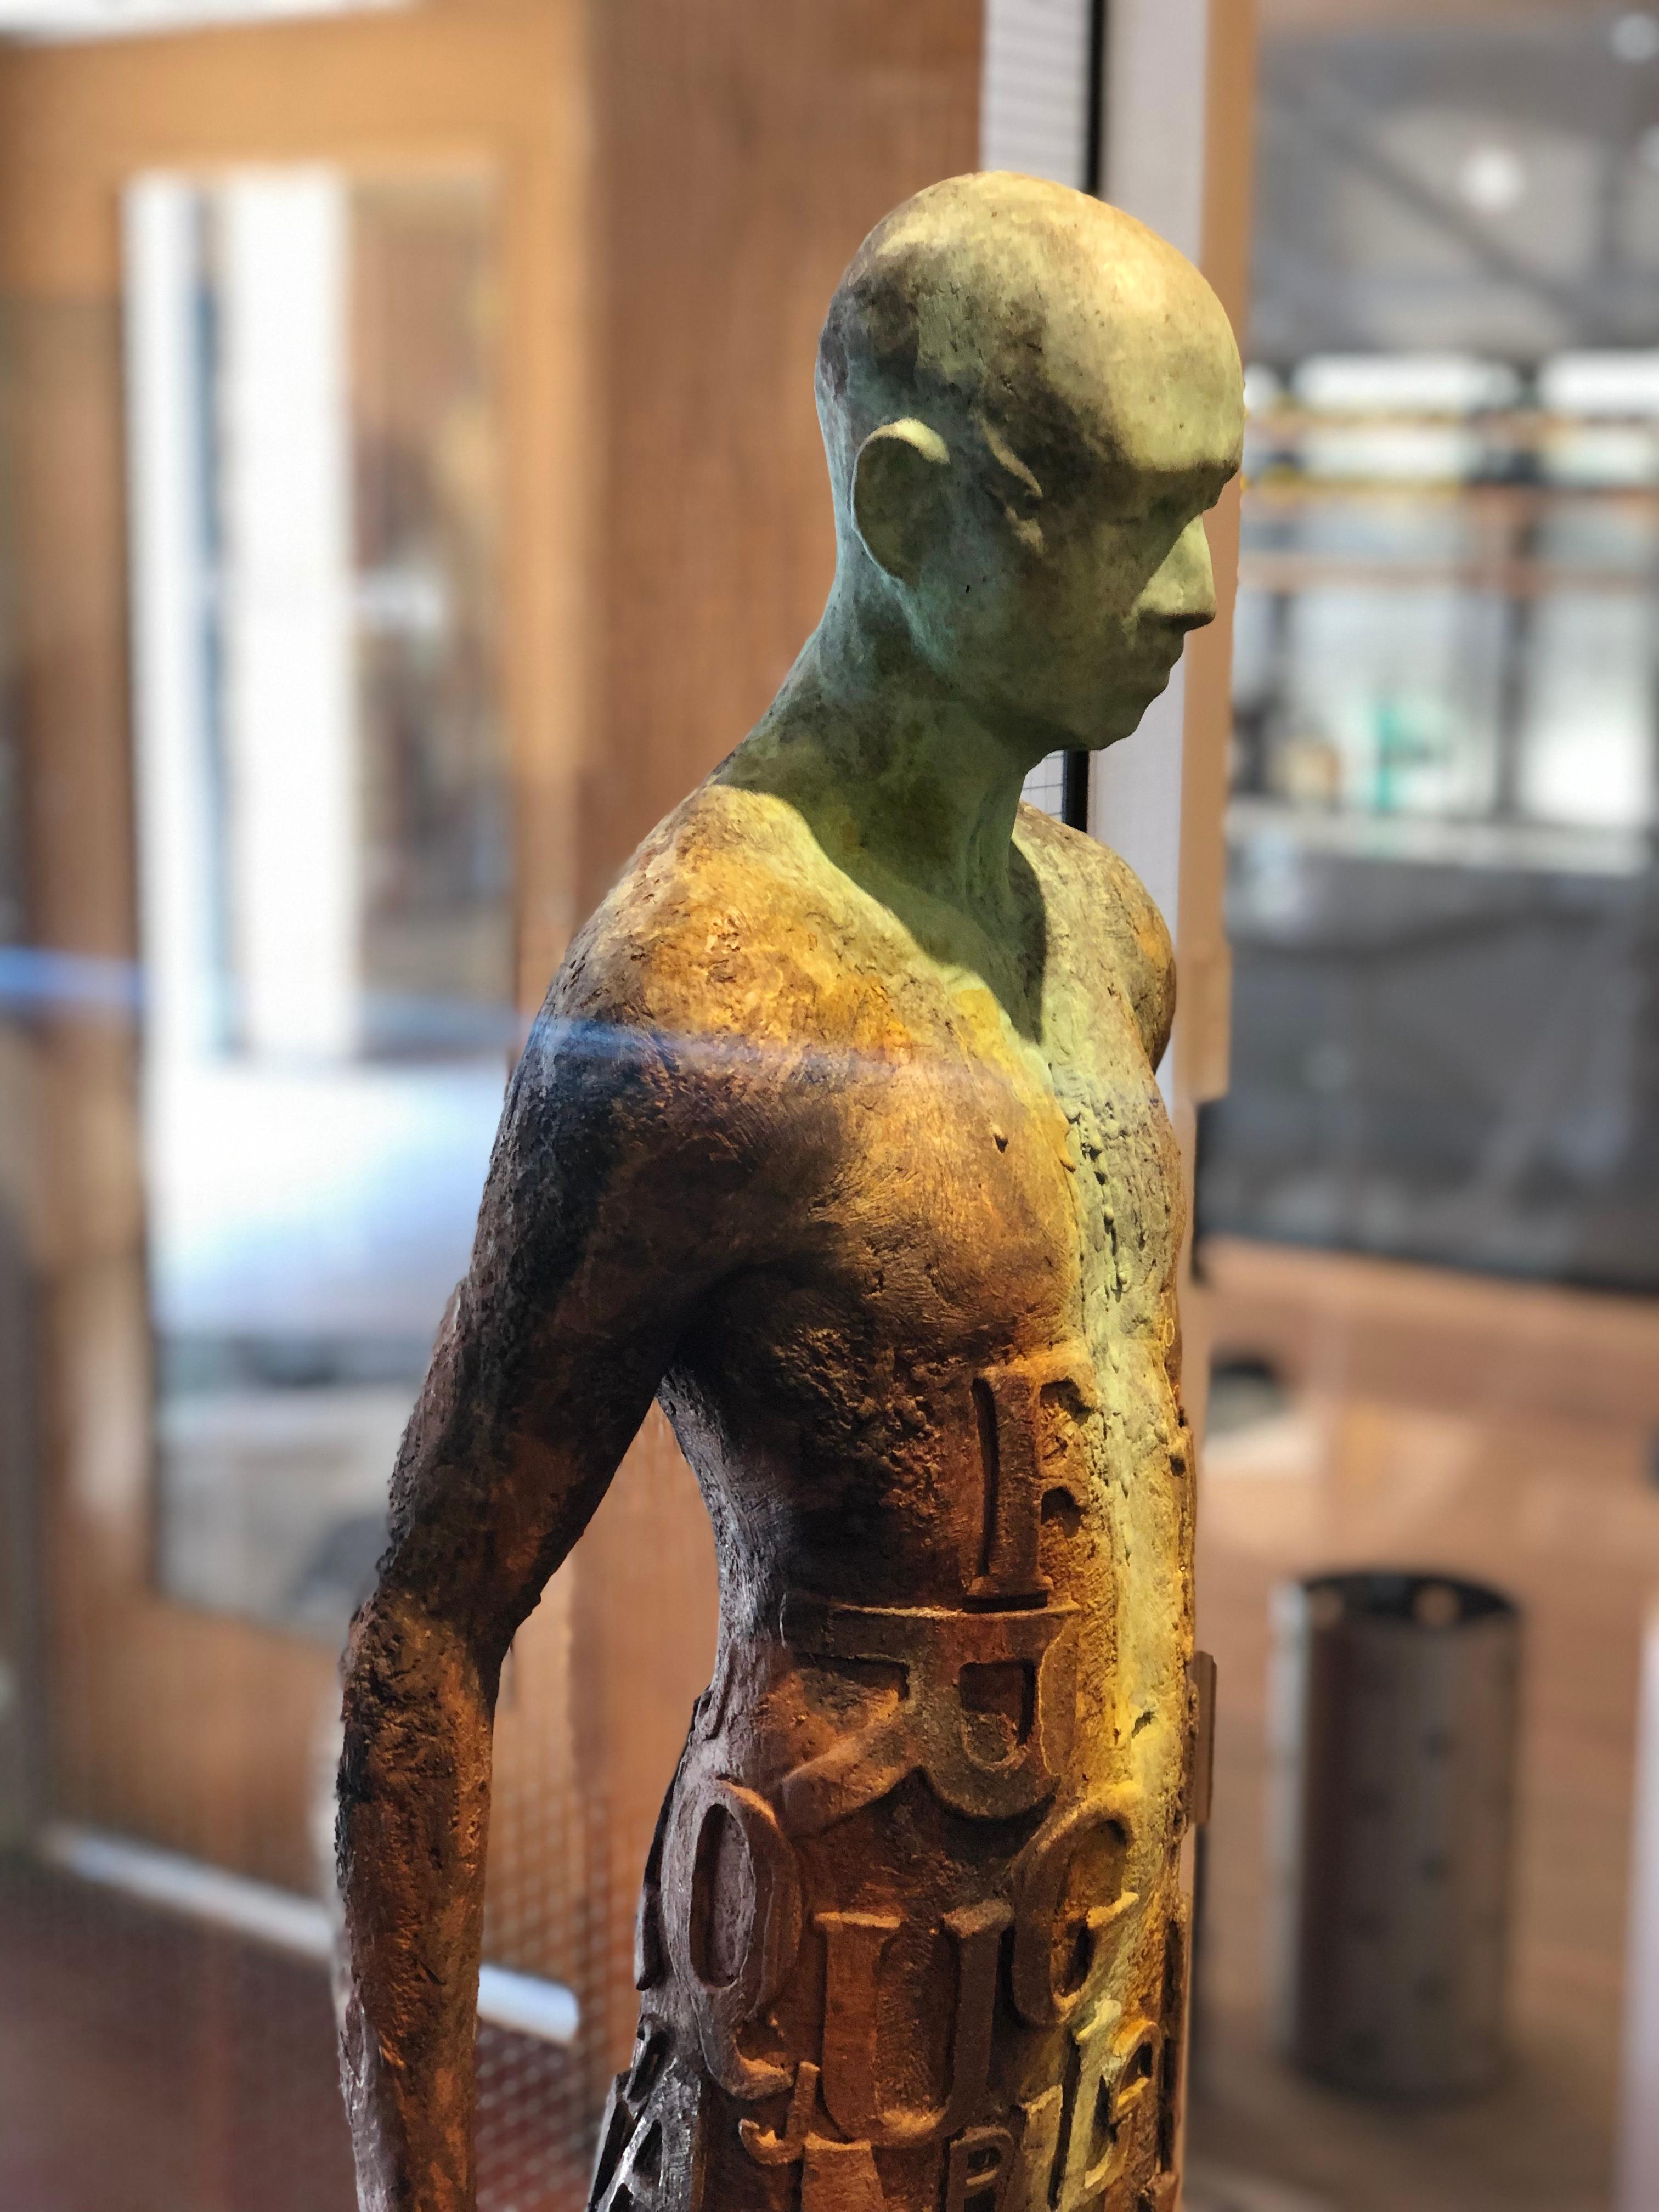 Nuntius - Bronze and Steel Sculpture with Figure and See Through 